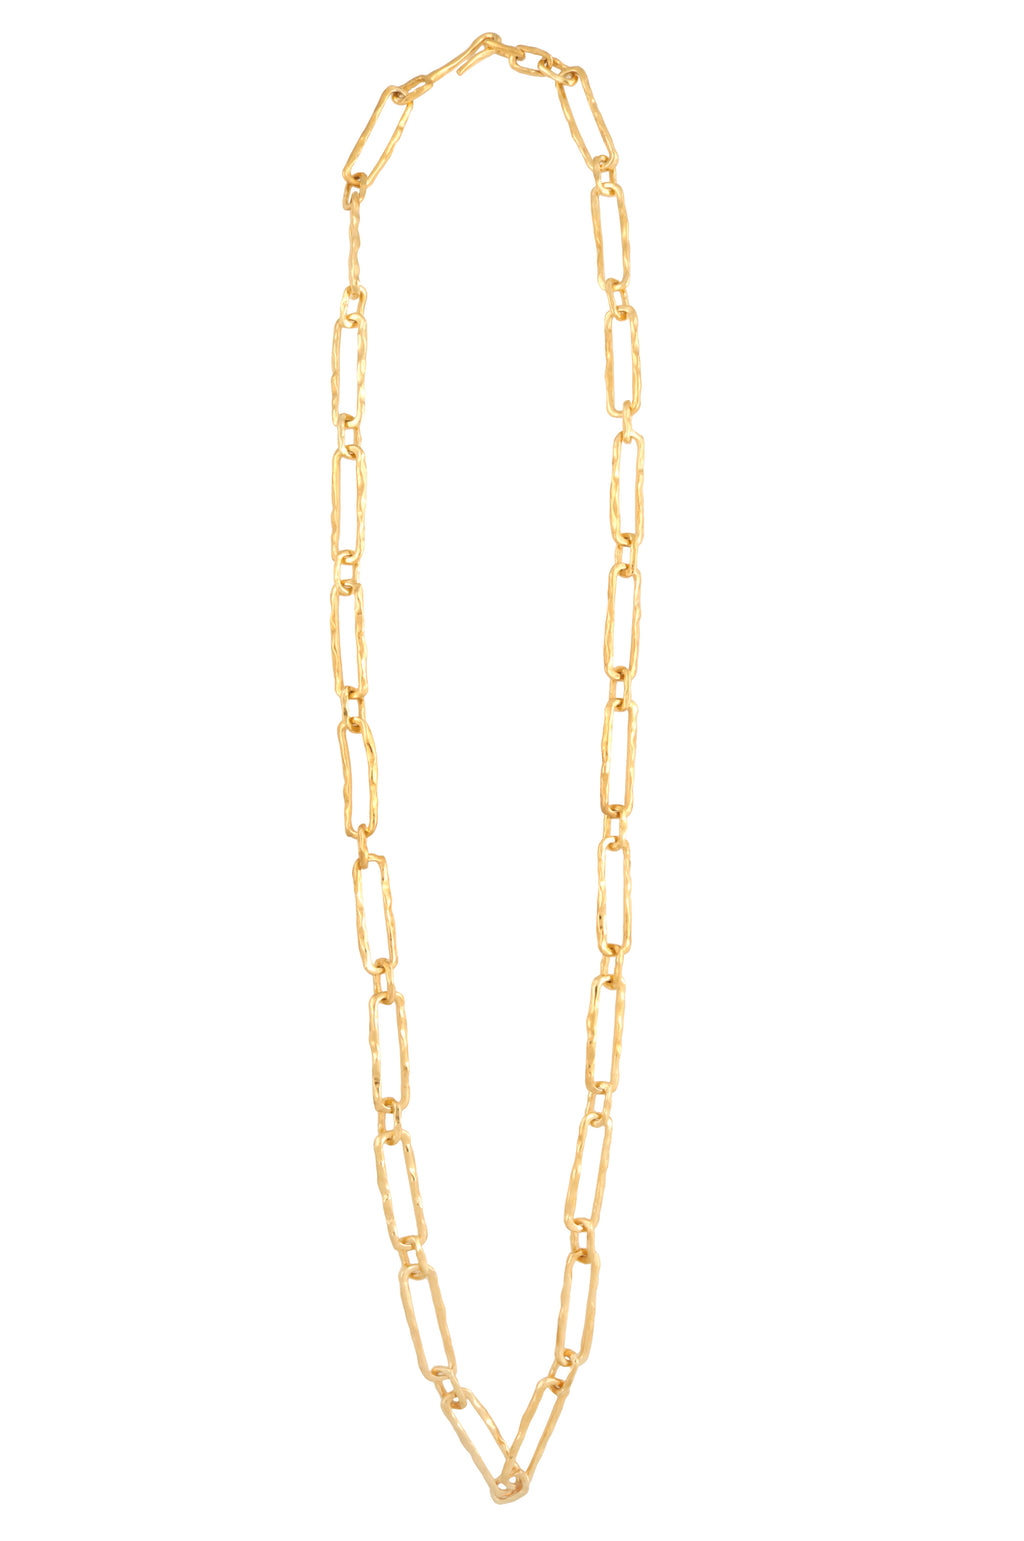 LONG WAVE LINK CHAIN NECKLACE